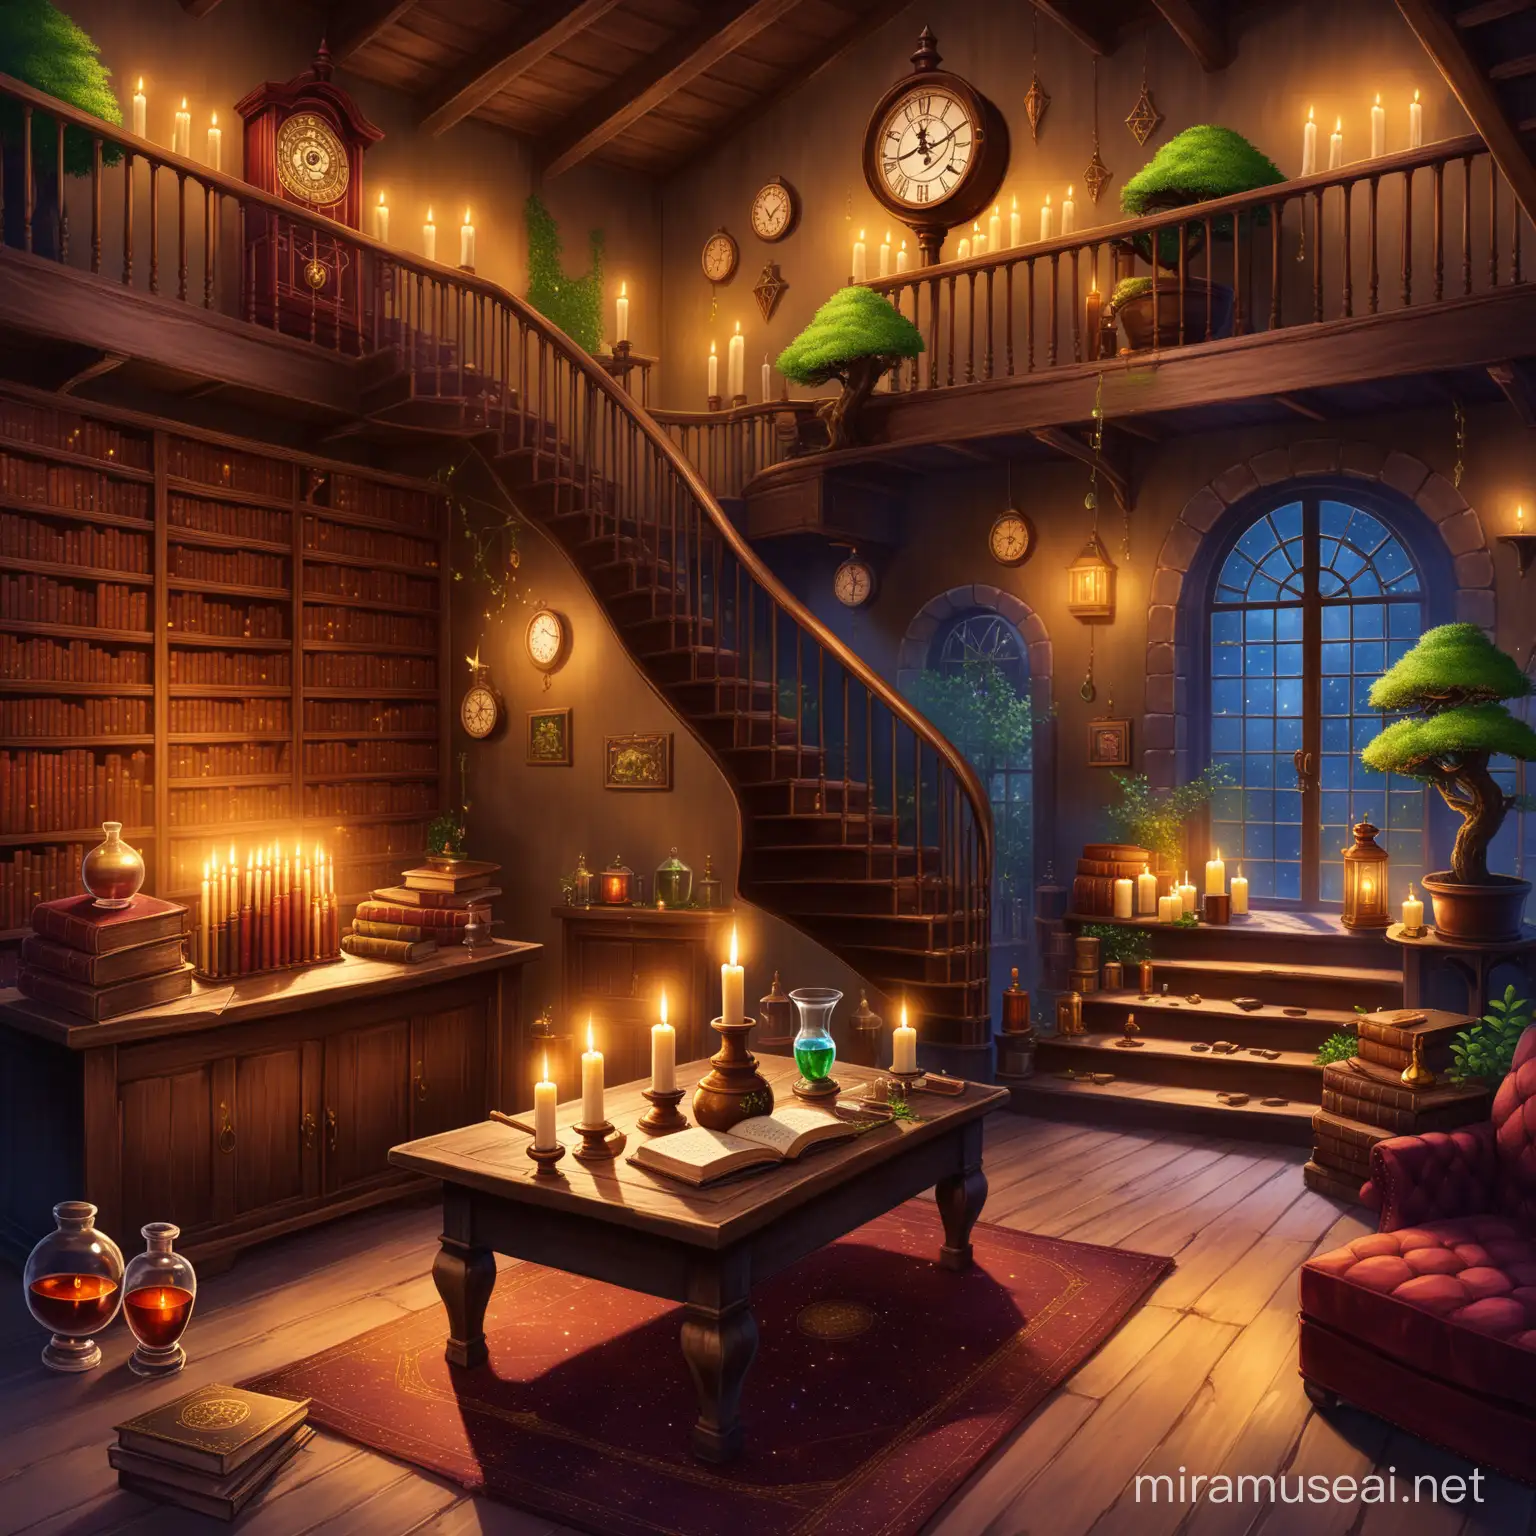 Enchanted Magic Shop with Spell Books and Crystal Balls